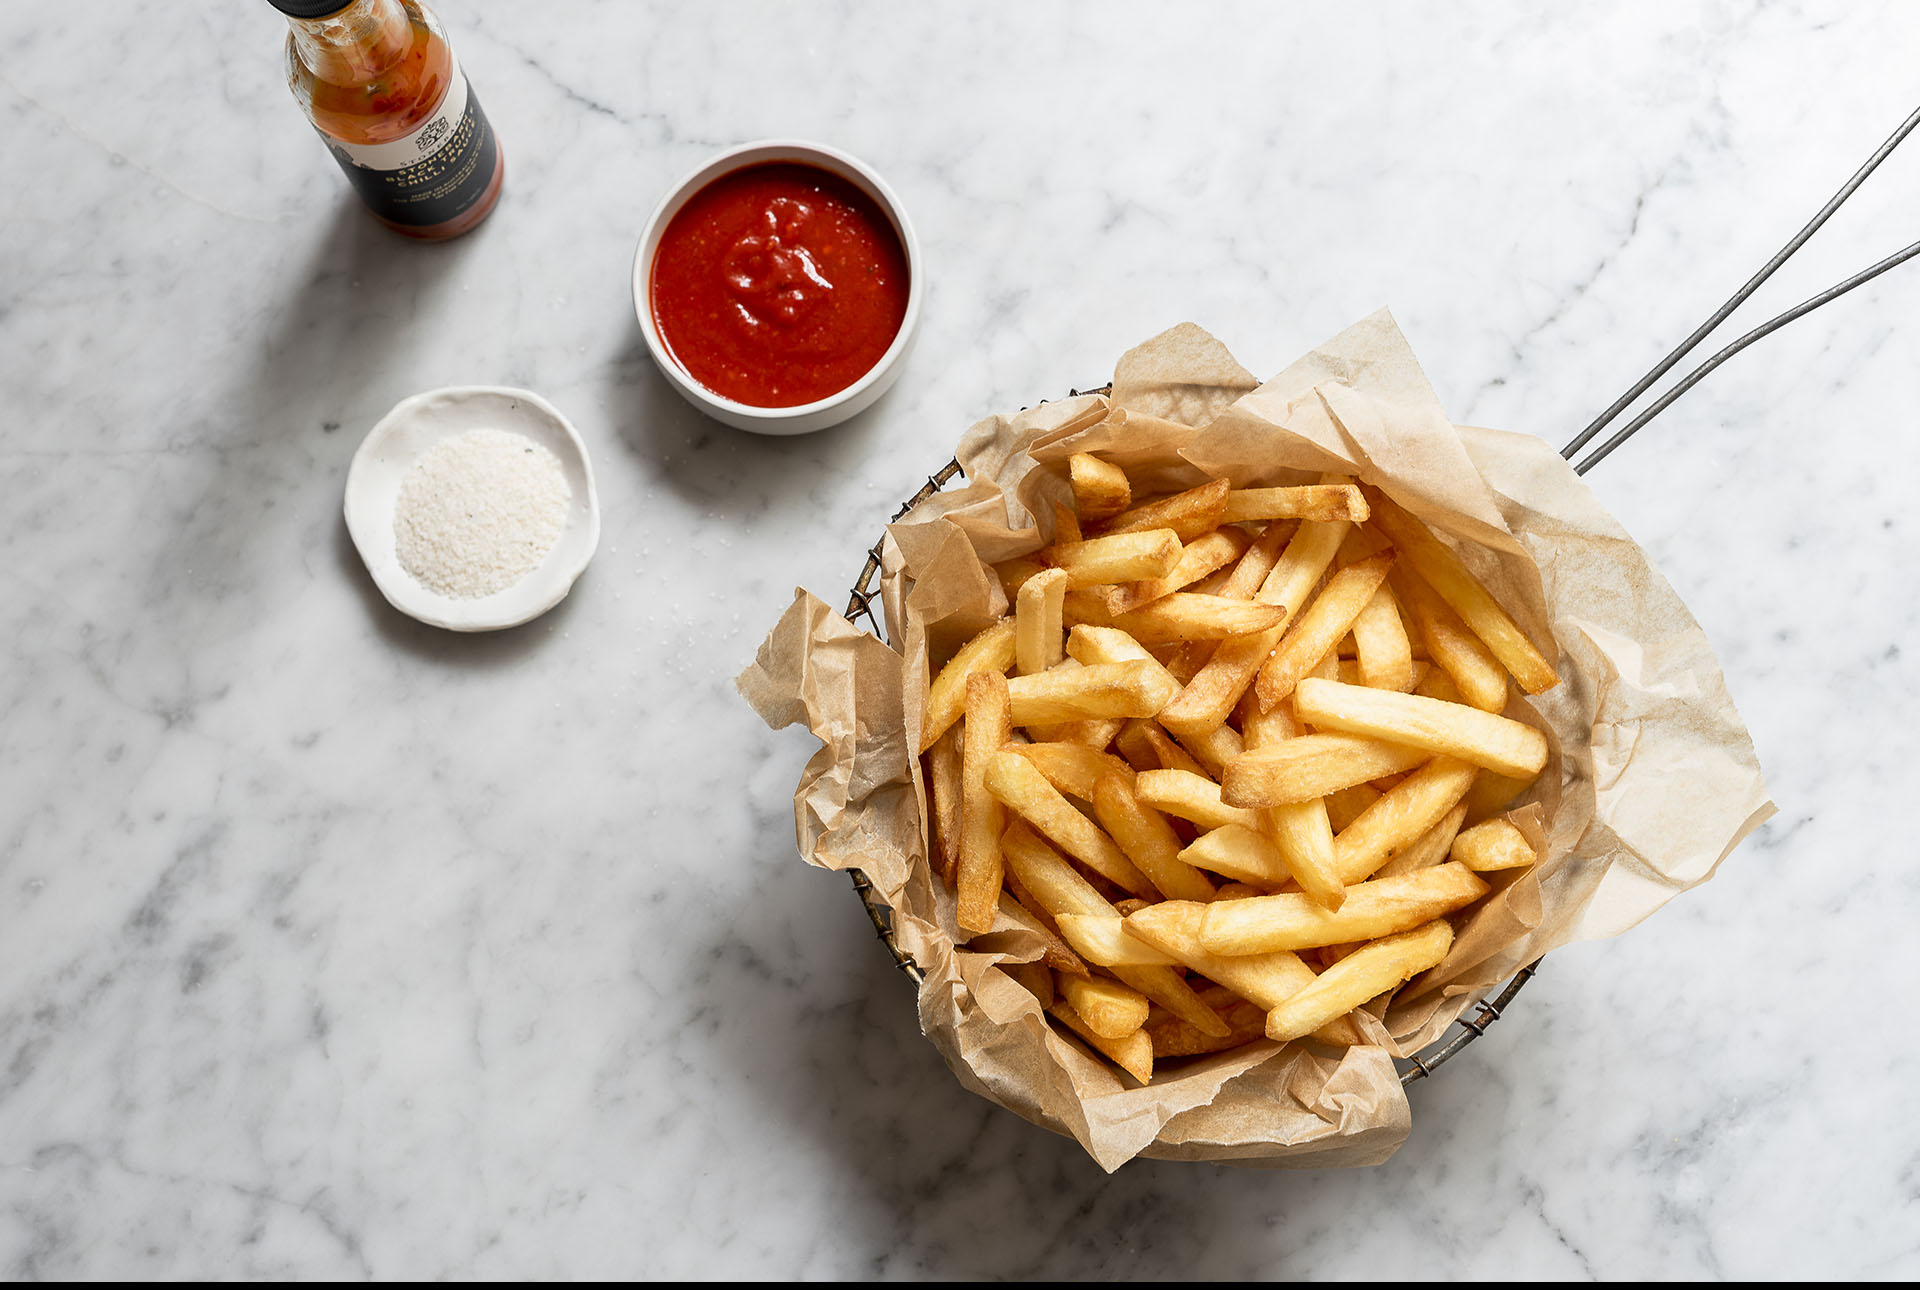 You are currently viewing The Perfect Fries with Chilli Tomato Truffle Dipping Sauce